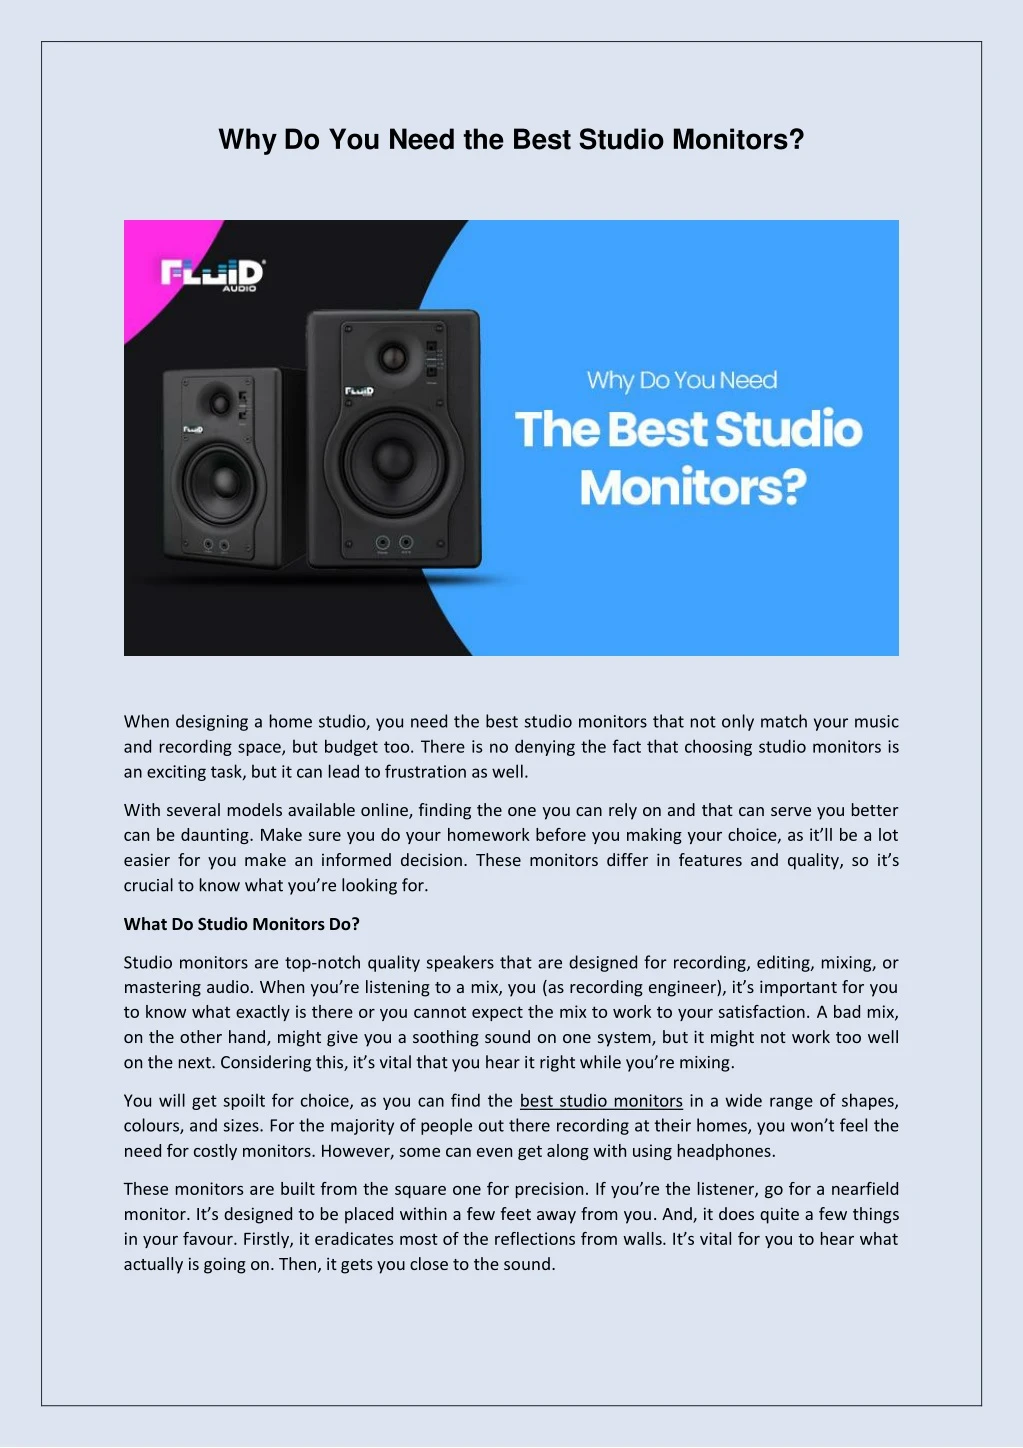 why do you need the best studio monitors